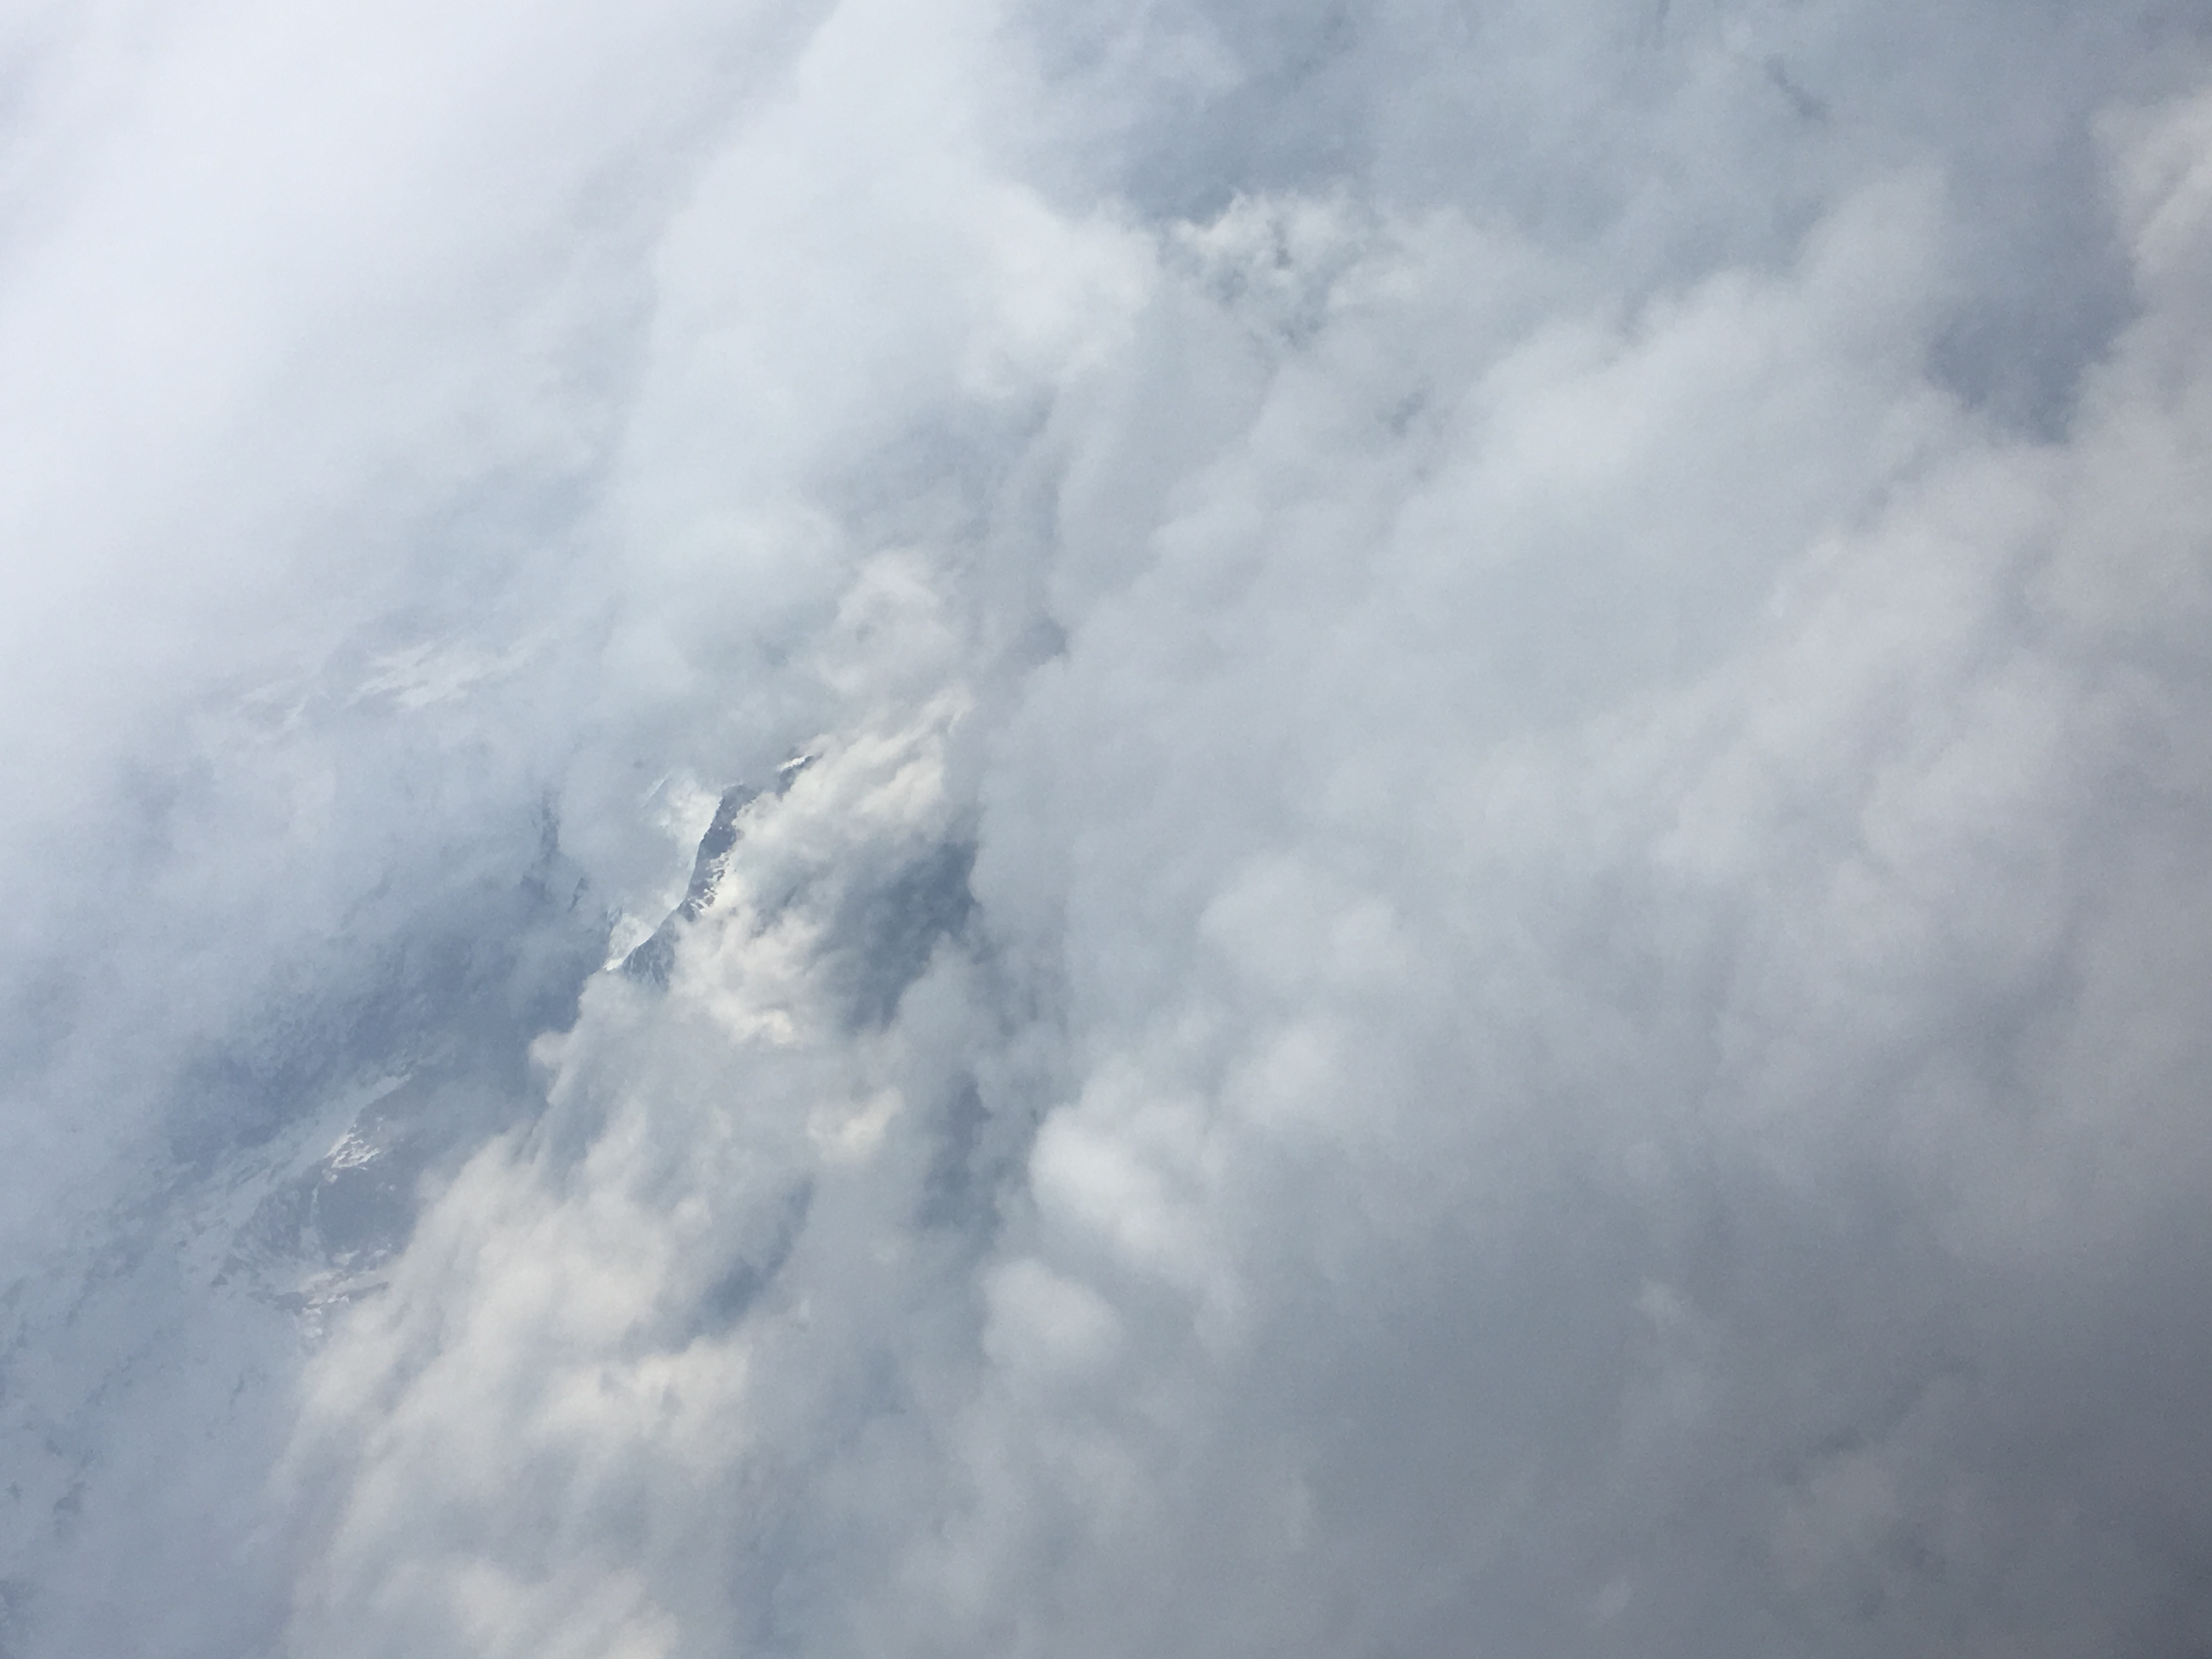 Photograph of mountains in clouds as seen from the air